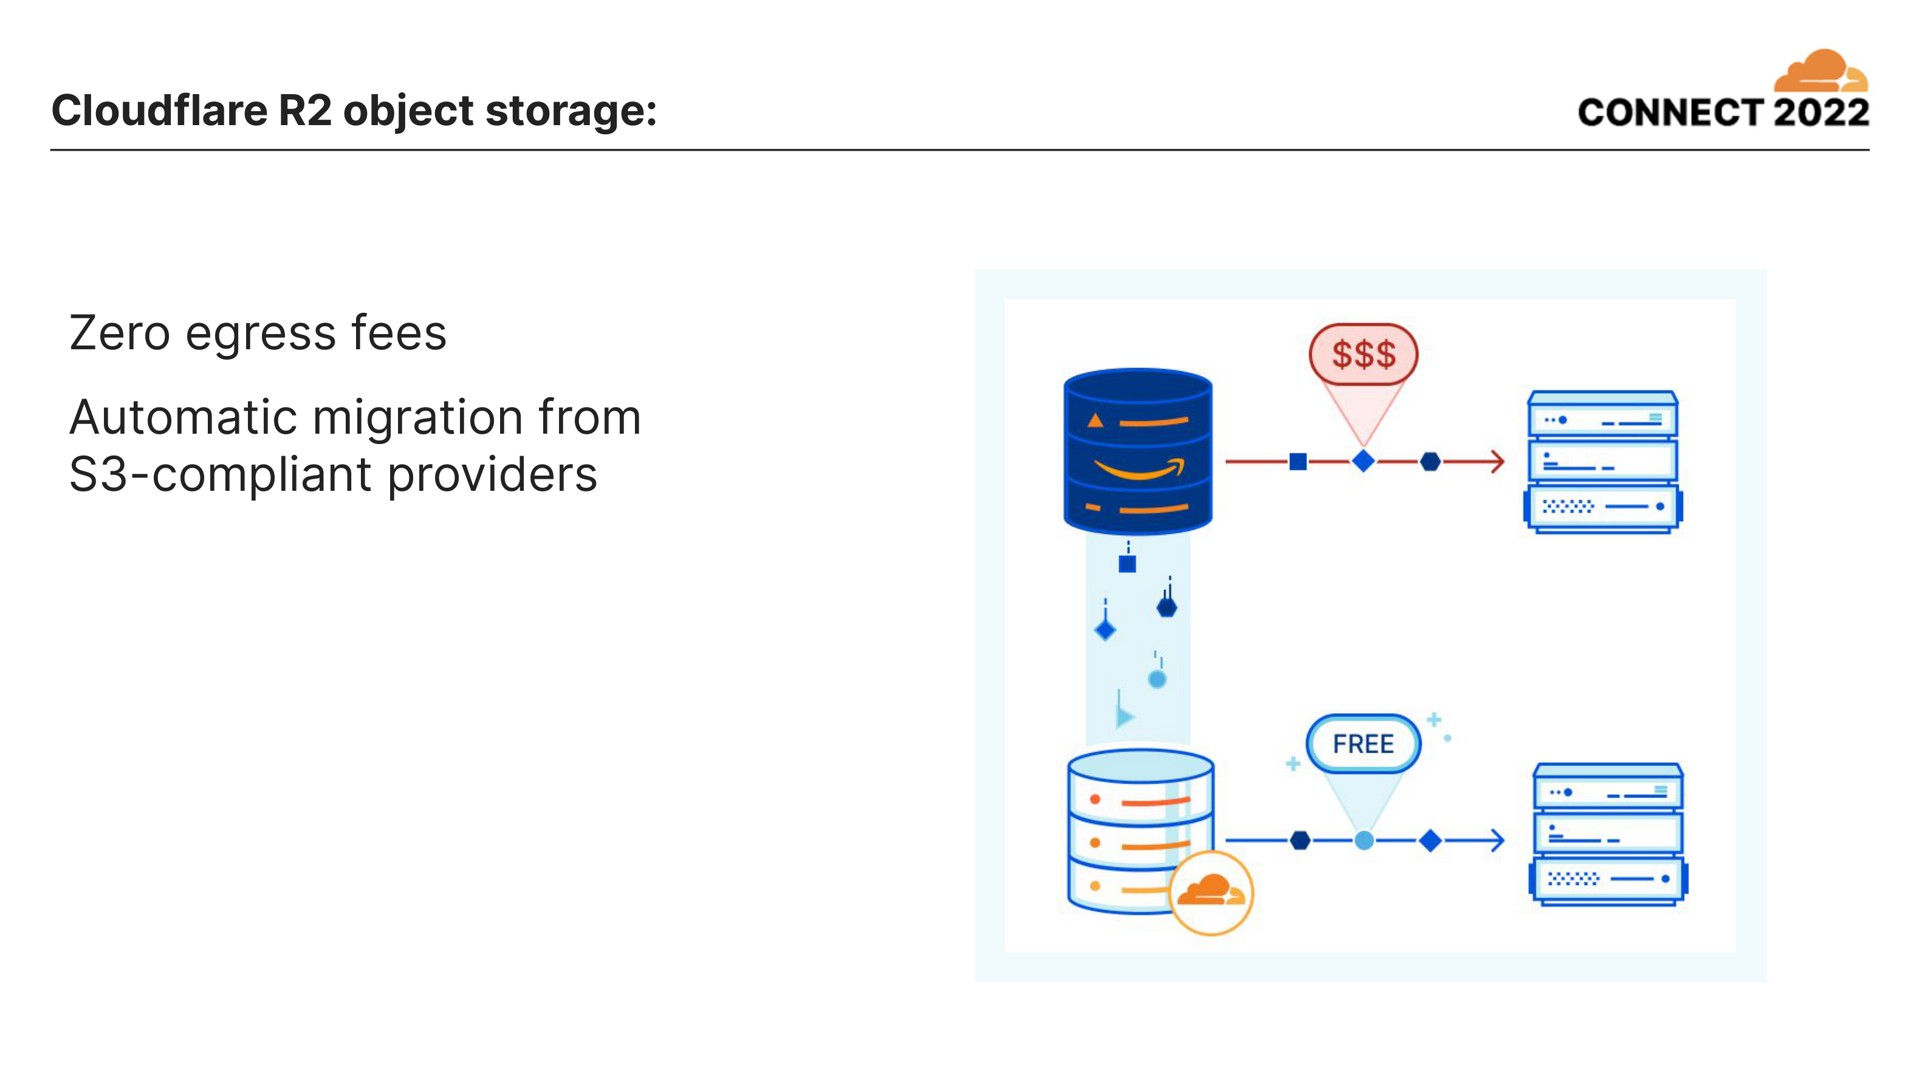 object storage connect zero egress fees automatic migration from compliant providers | Cloudflare